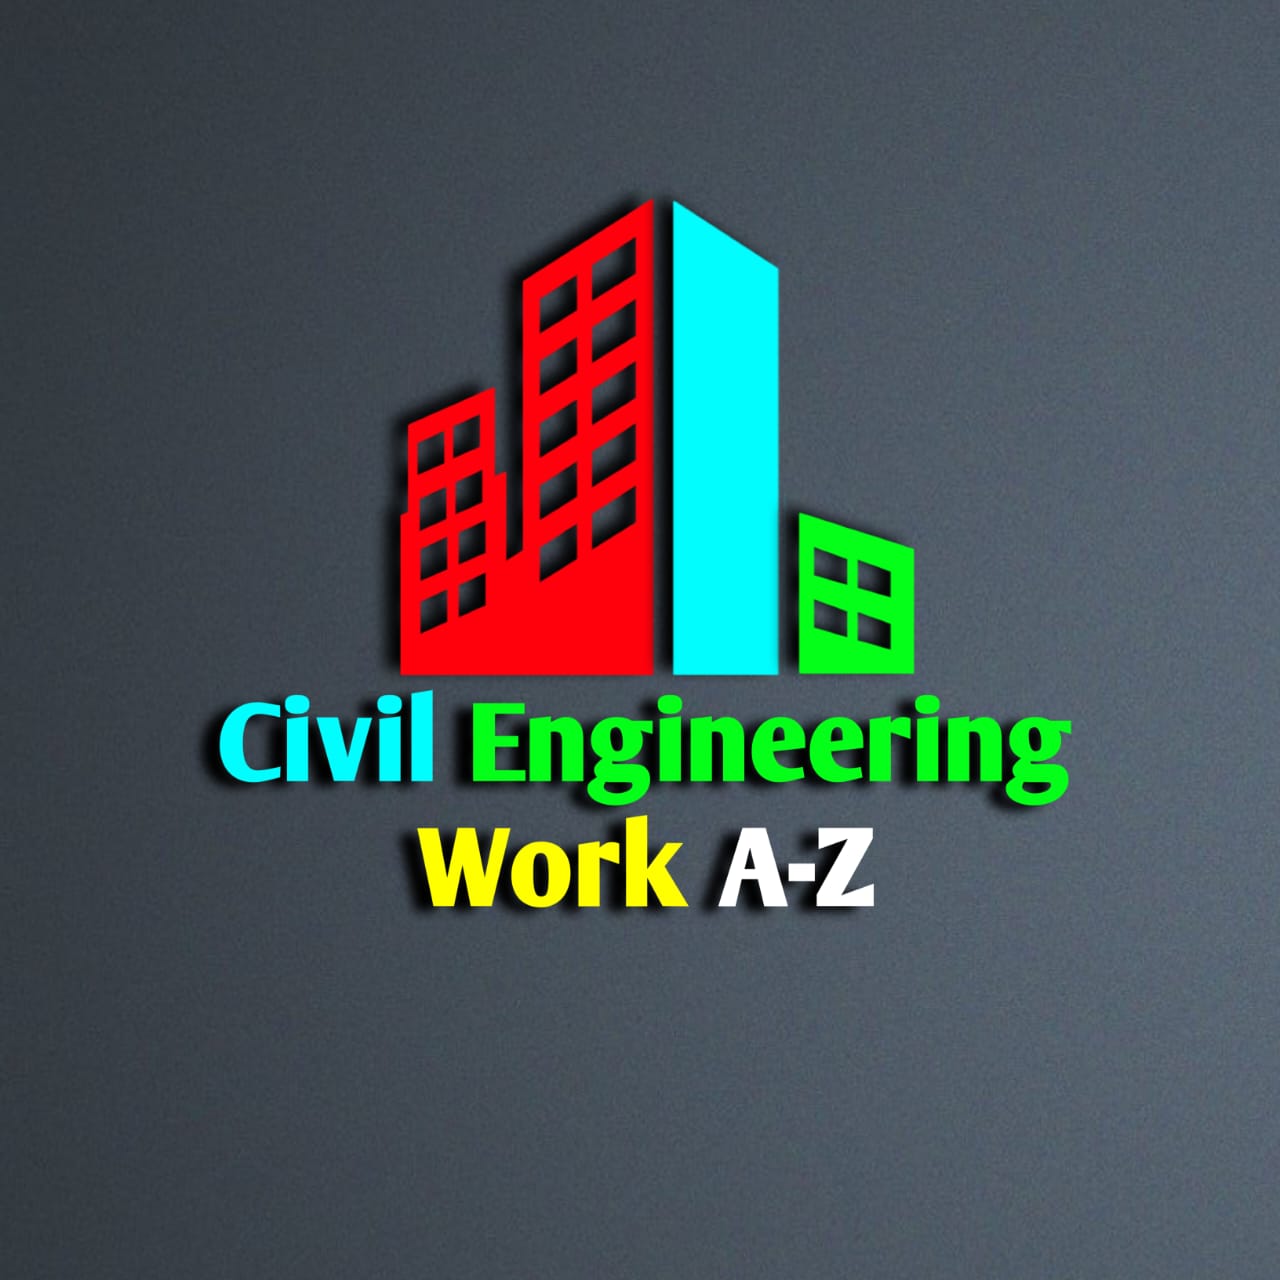 Civil Engineering A-Z